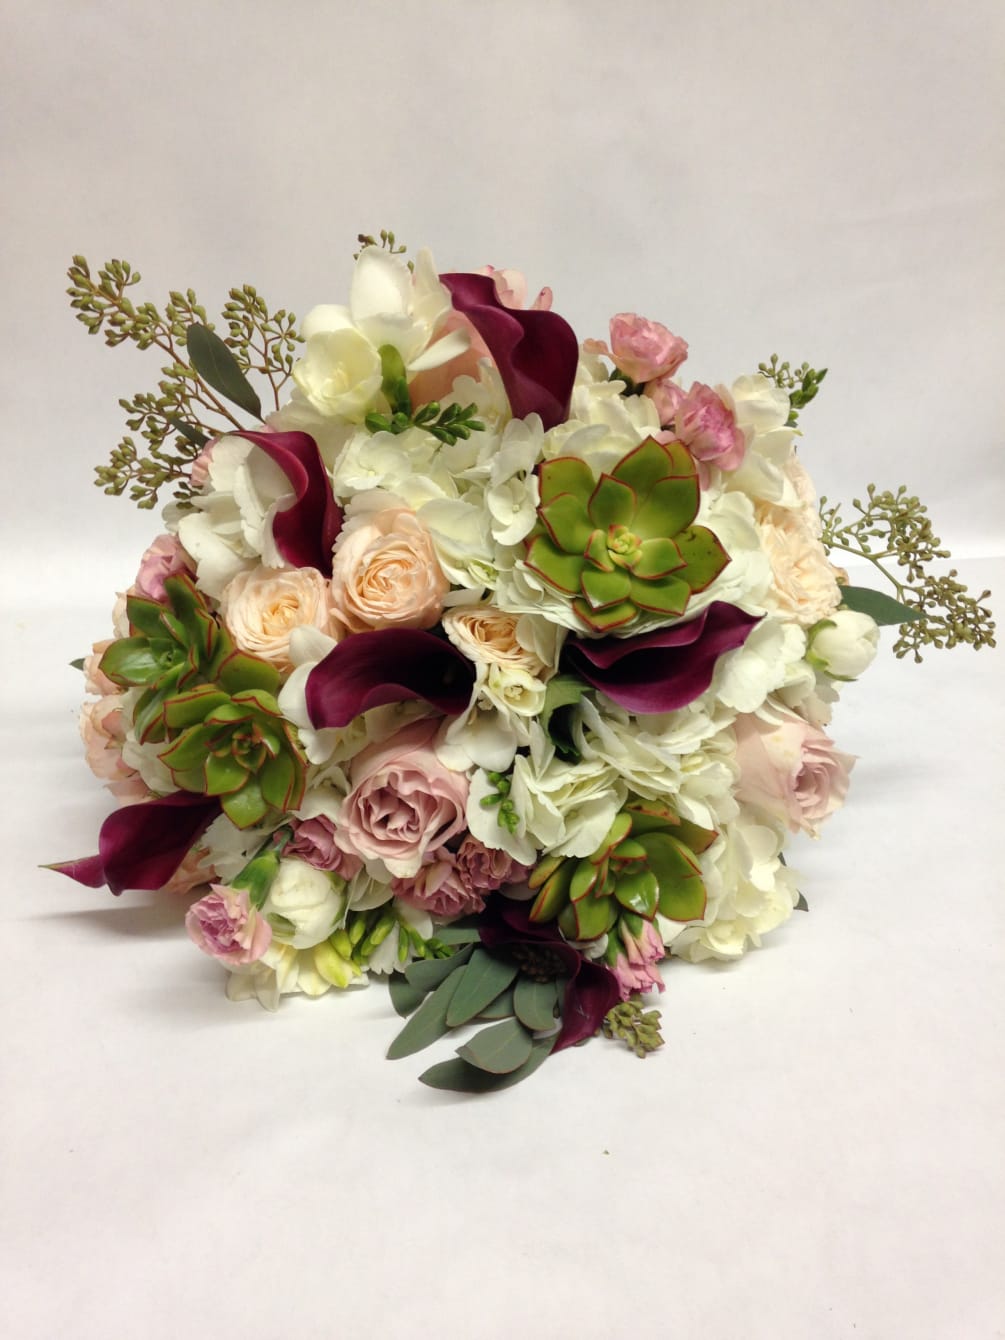 This bridal bouquet comes complete with lavish succulents (designer&#039;s choice of jade